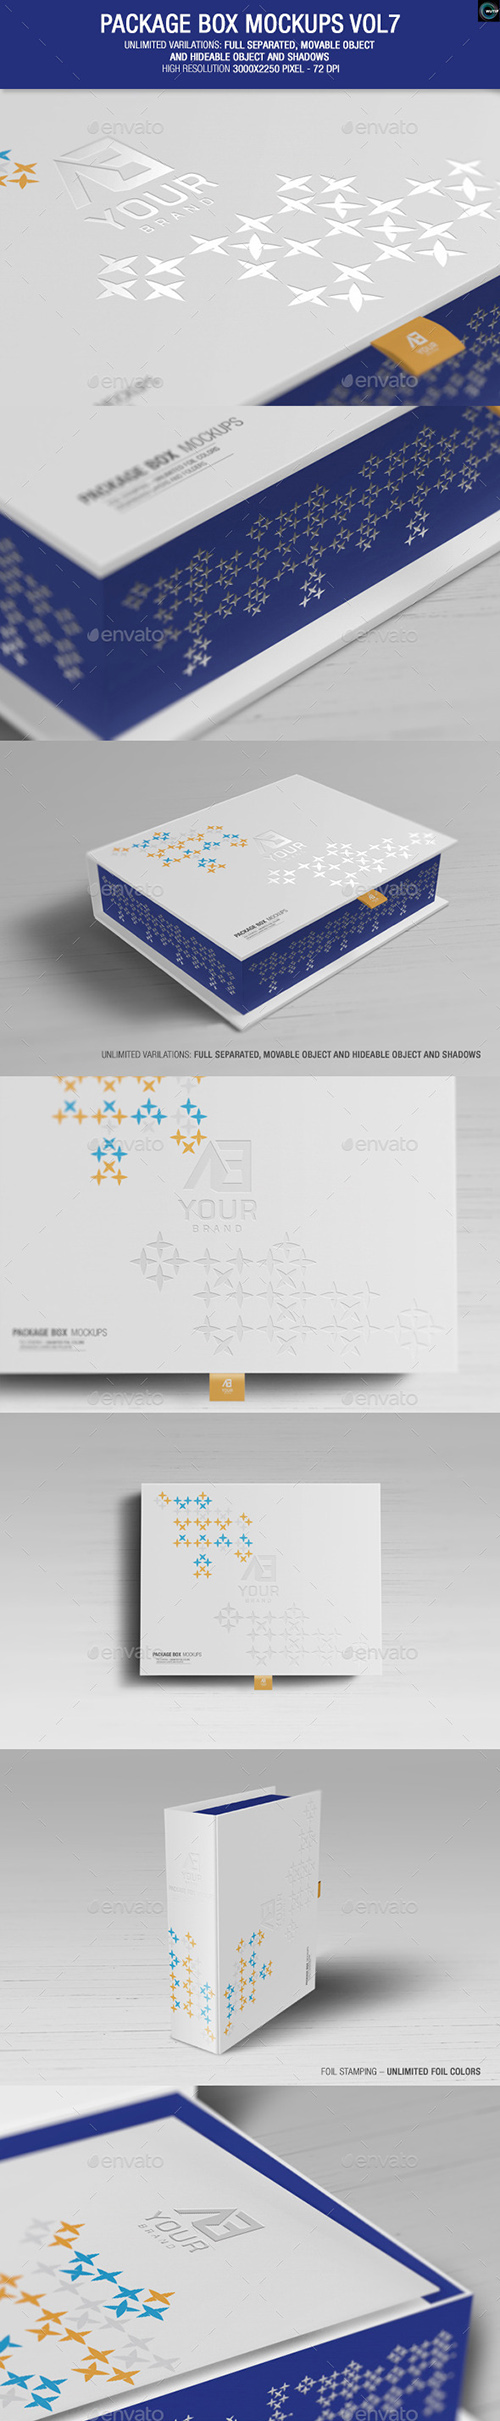 GraphicRiver - Package Box Mockups Vol.7 9924029